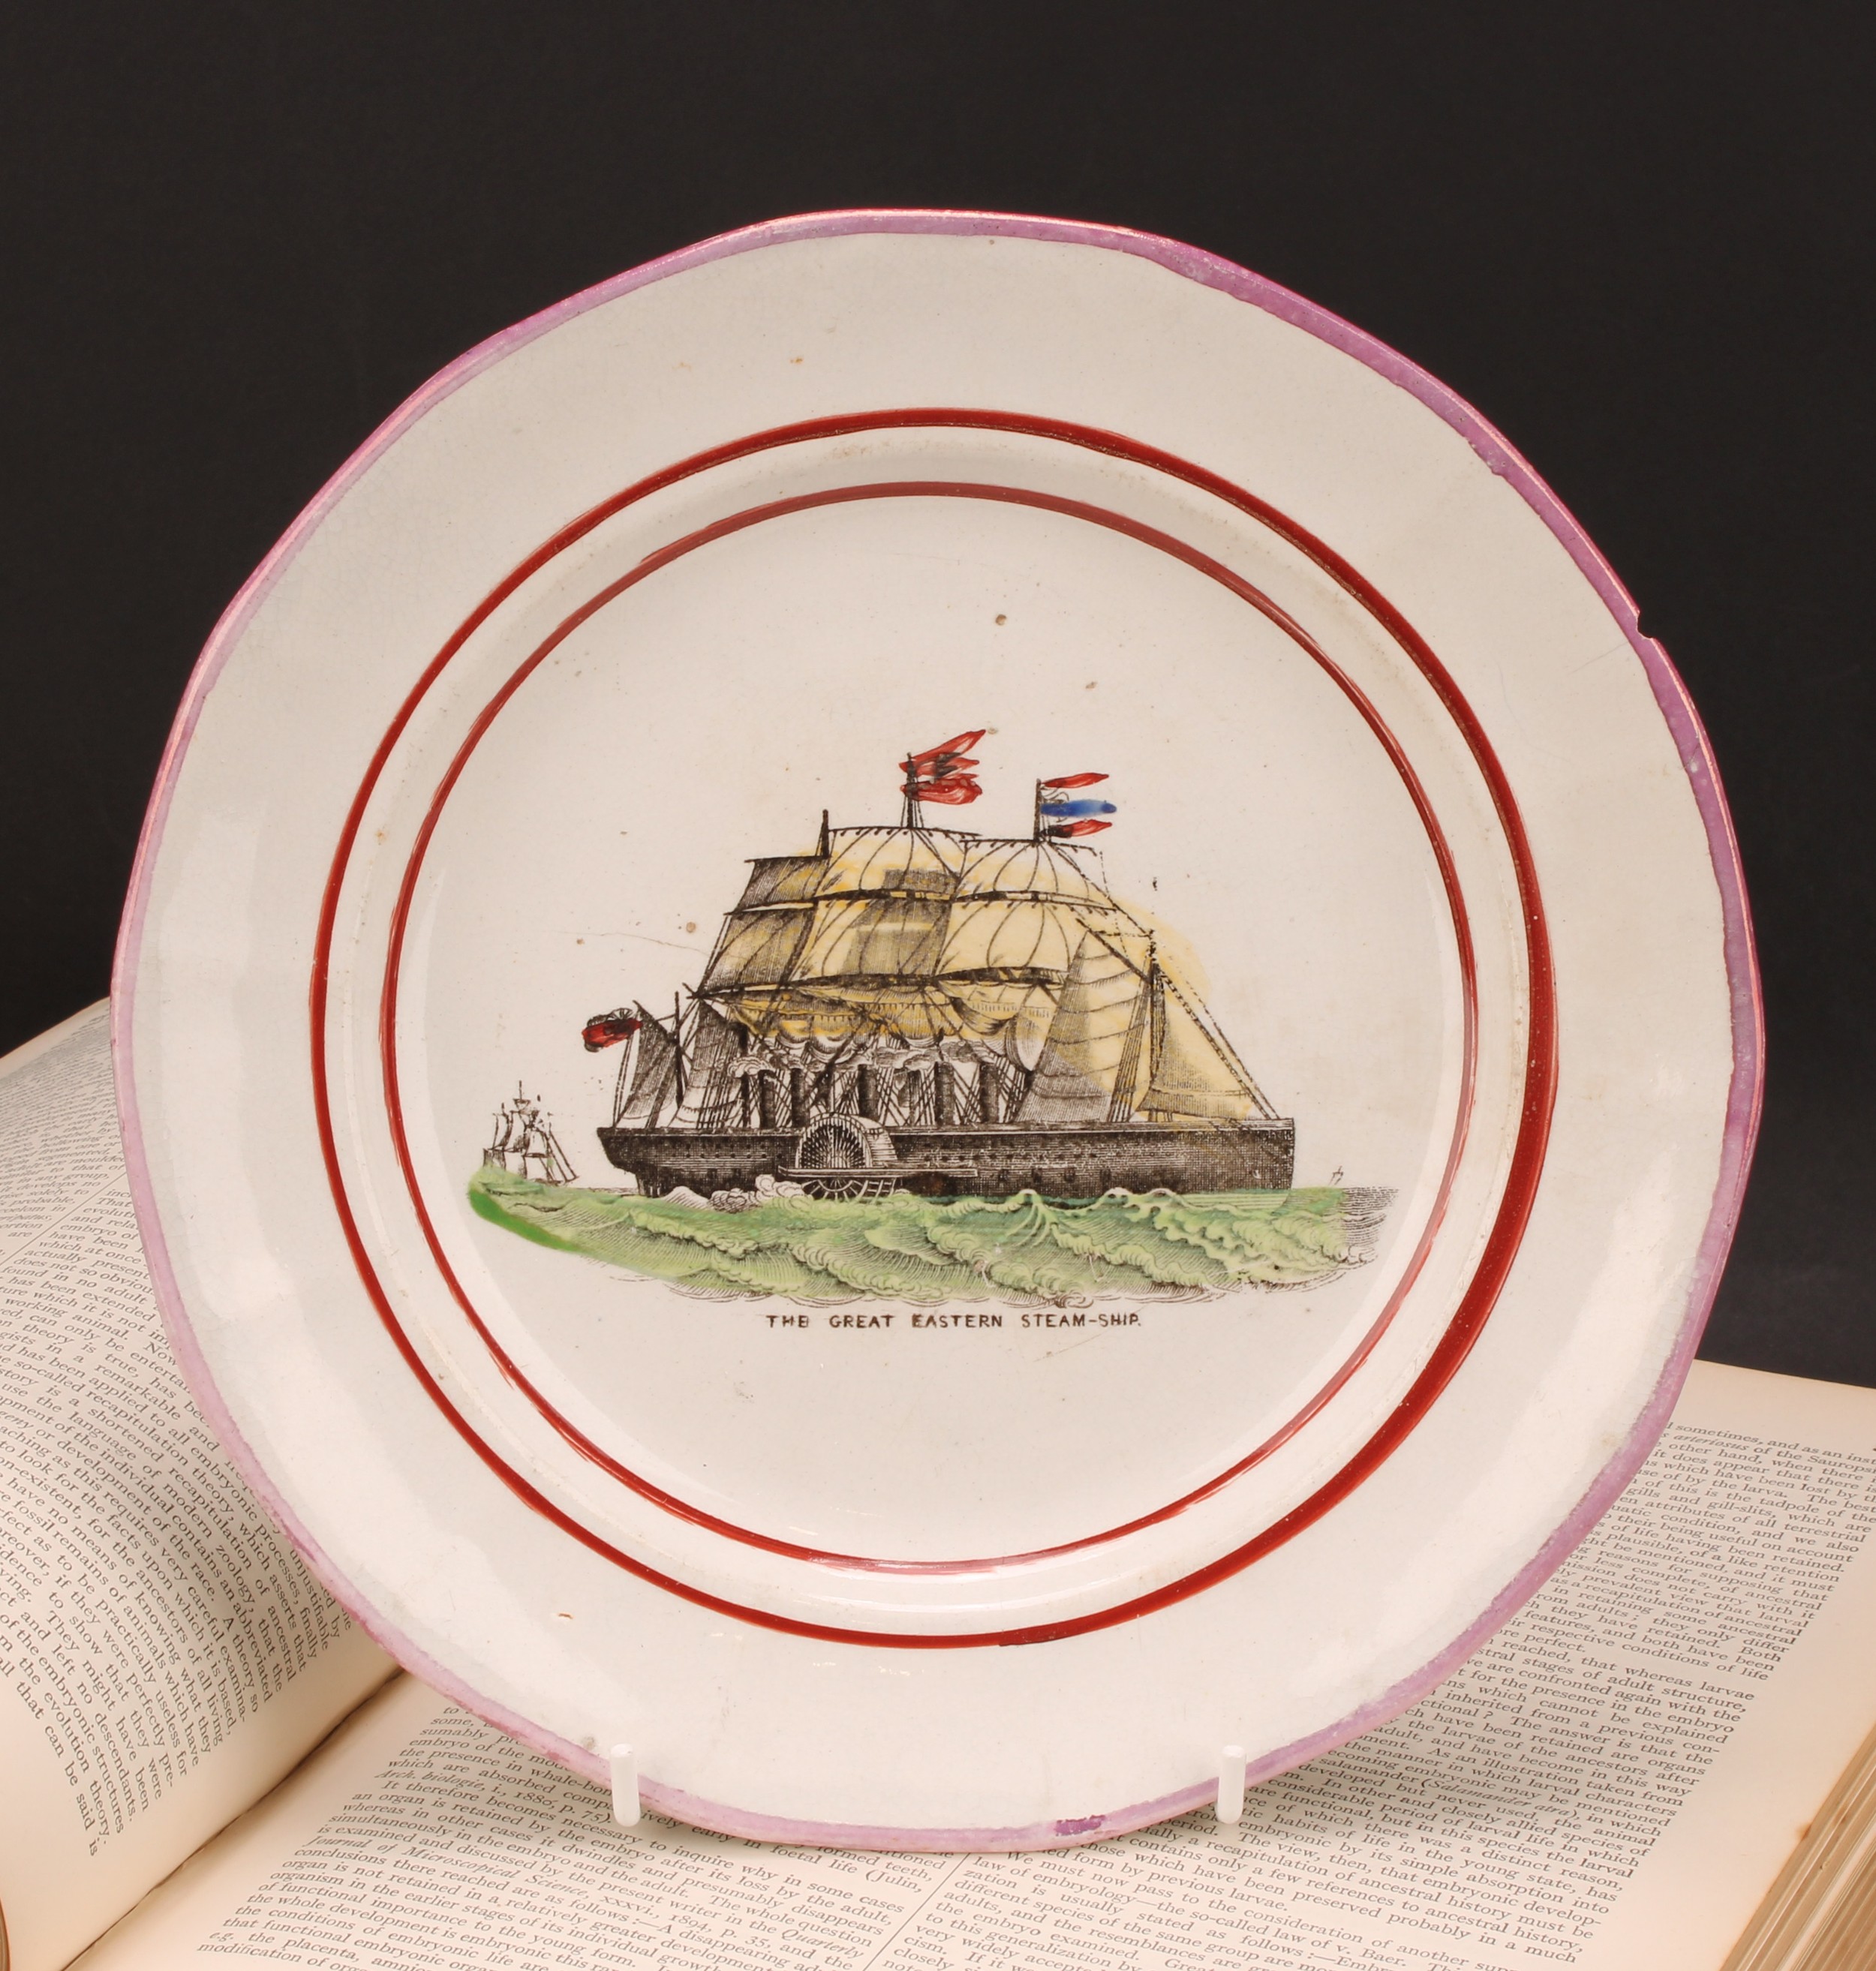 A Sunderland lustre prattware plate, The Great Eastern Steam-Ship, printed in sepia tones, picked